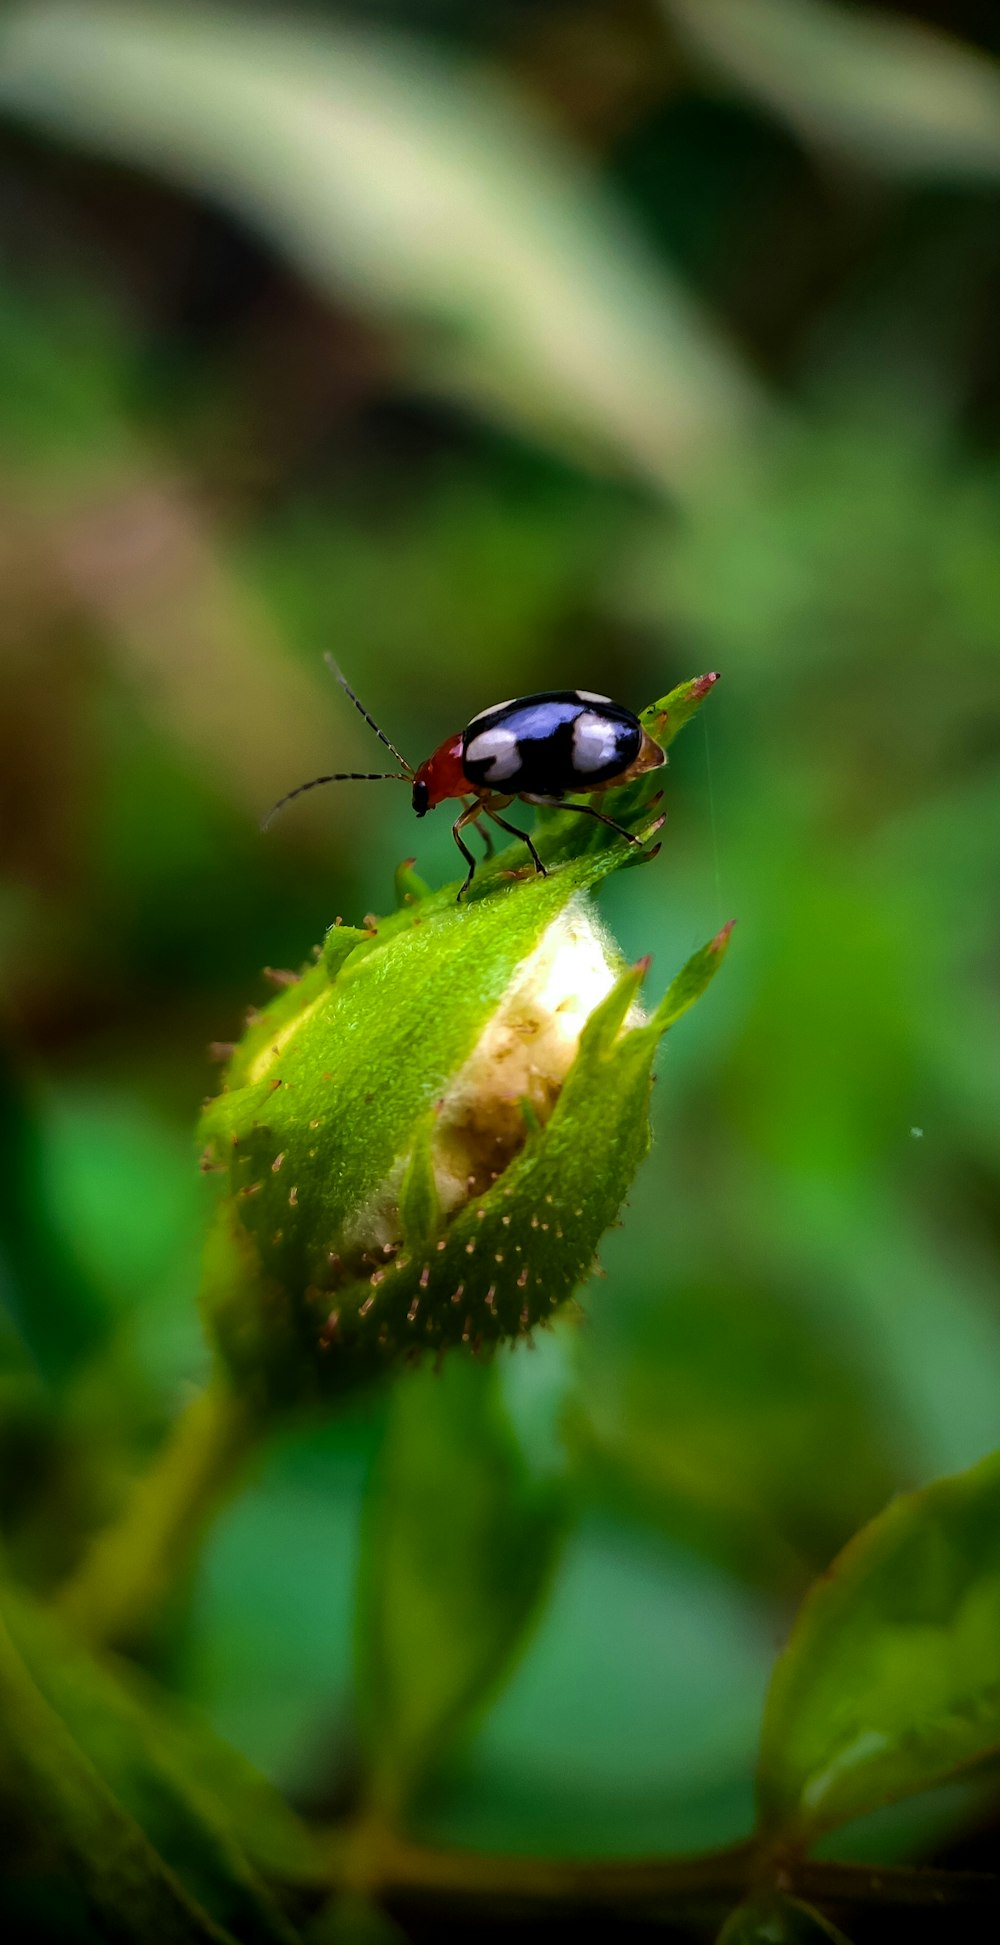 black and red ladybug on green leaf in macro photography